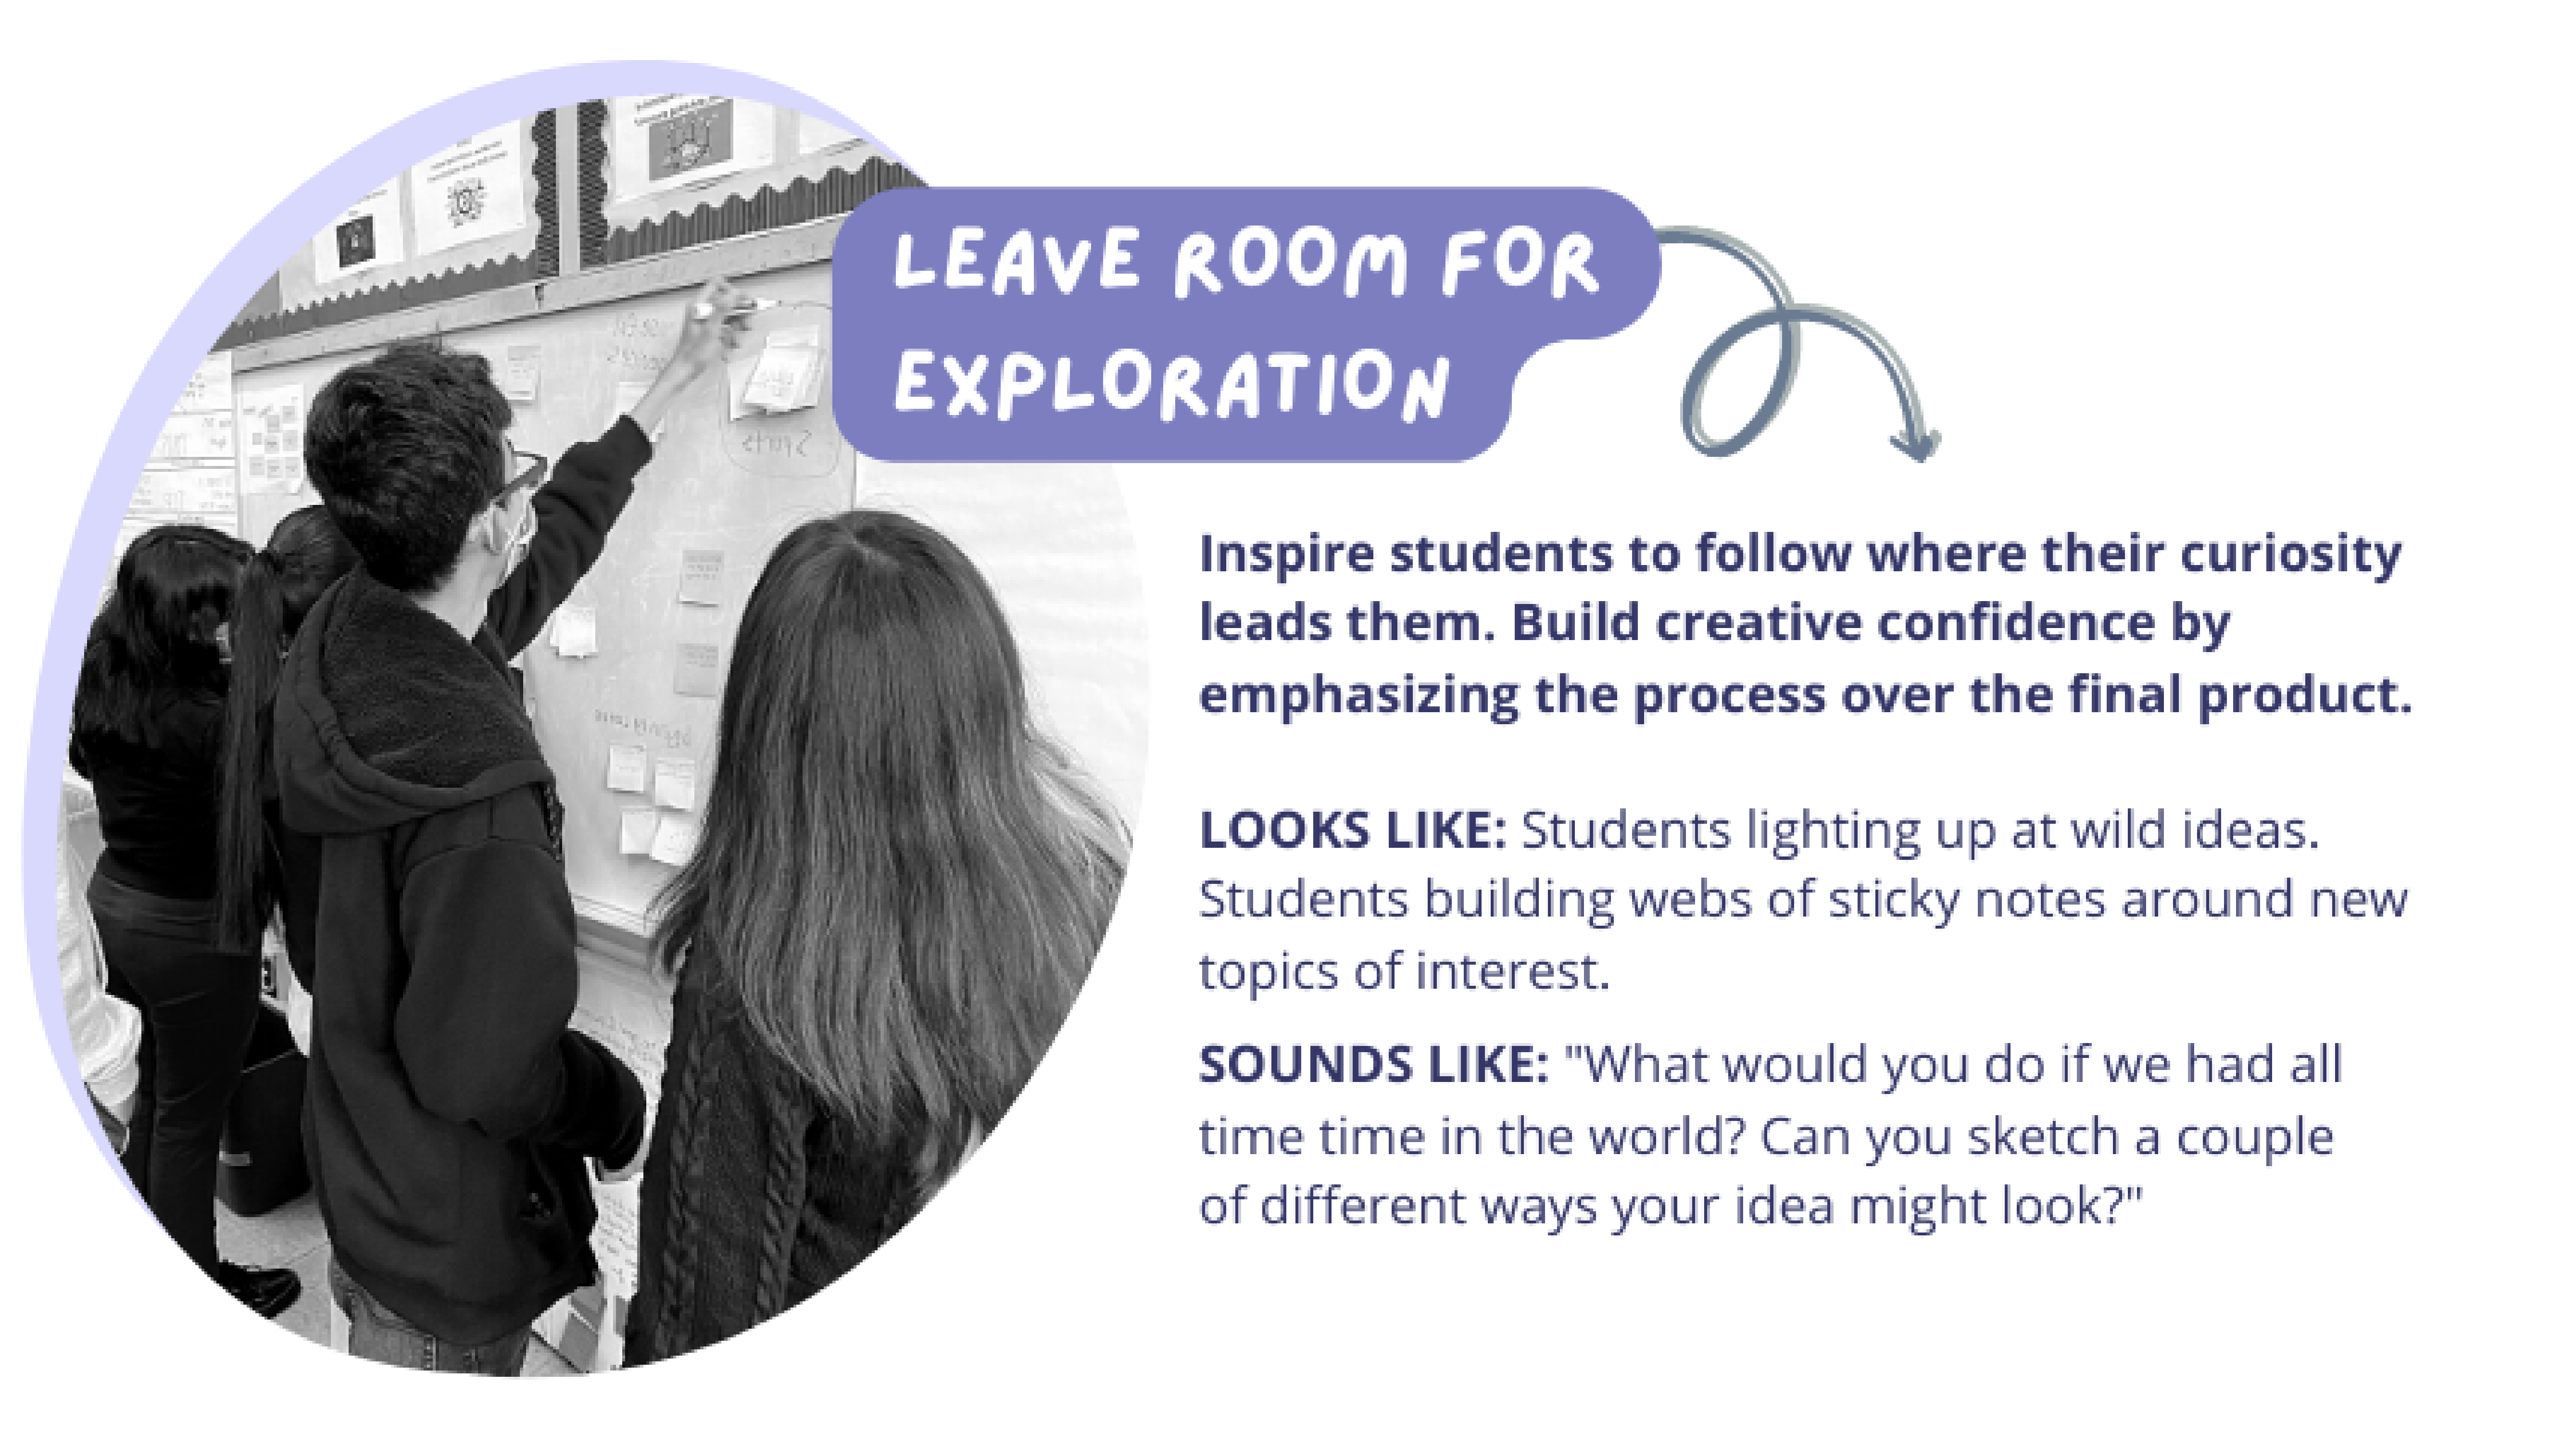 Leave Room for Exploration: Inspire students to follow where their curiosity leads them. Build creative confidence by emphasizing the process over the final product.